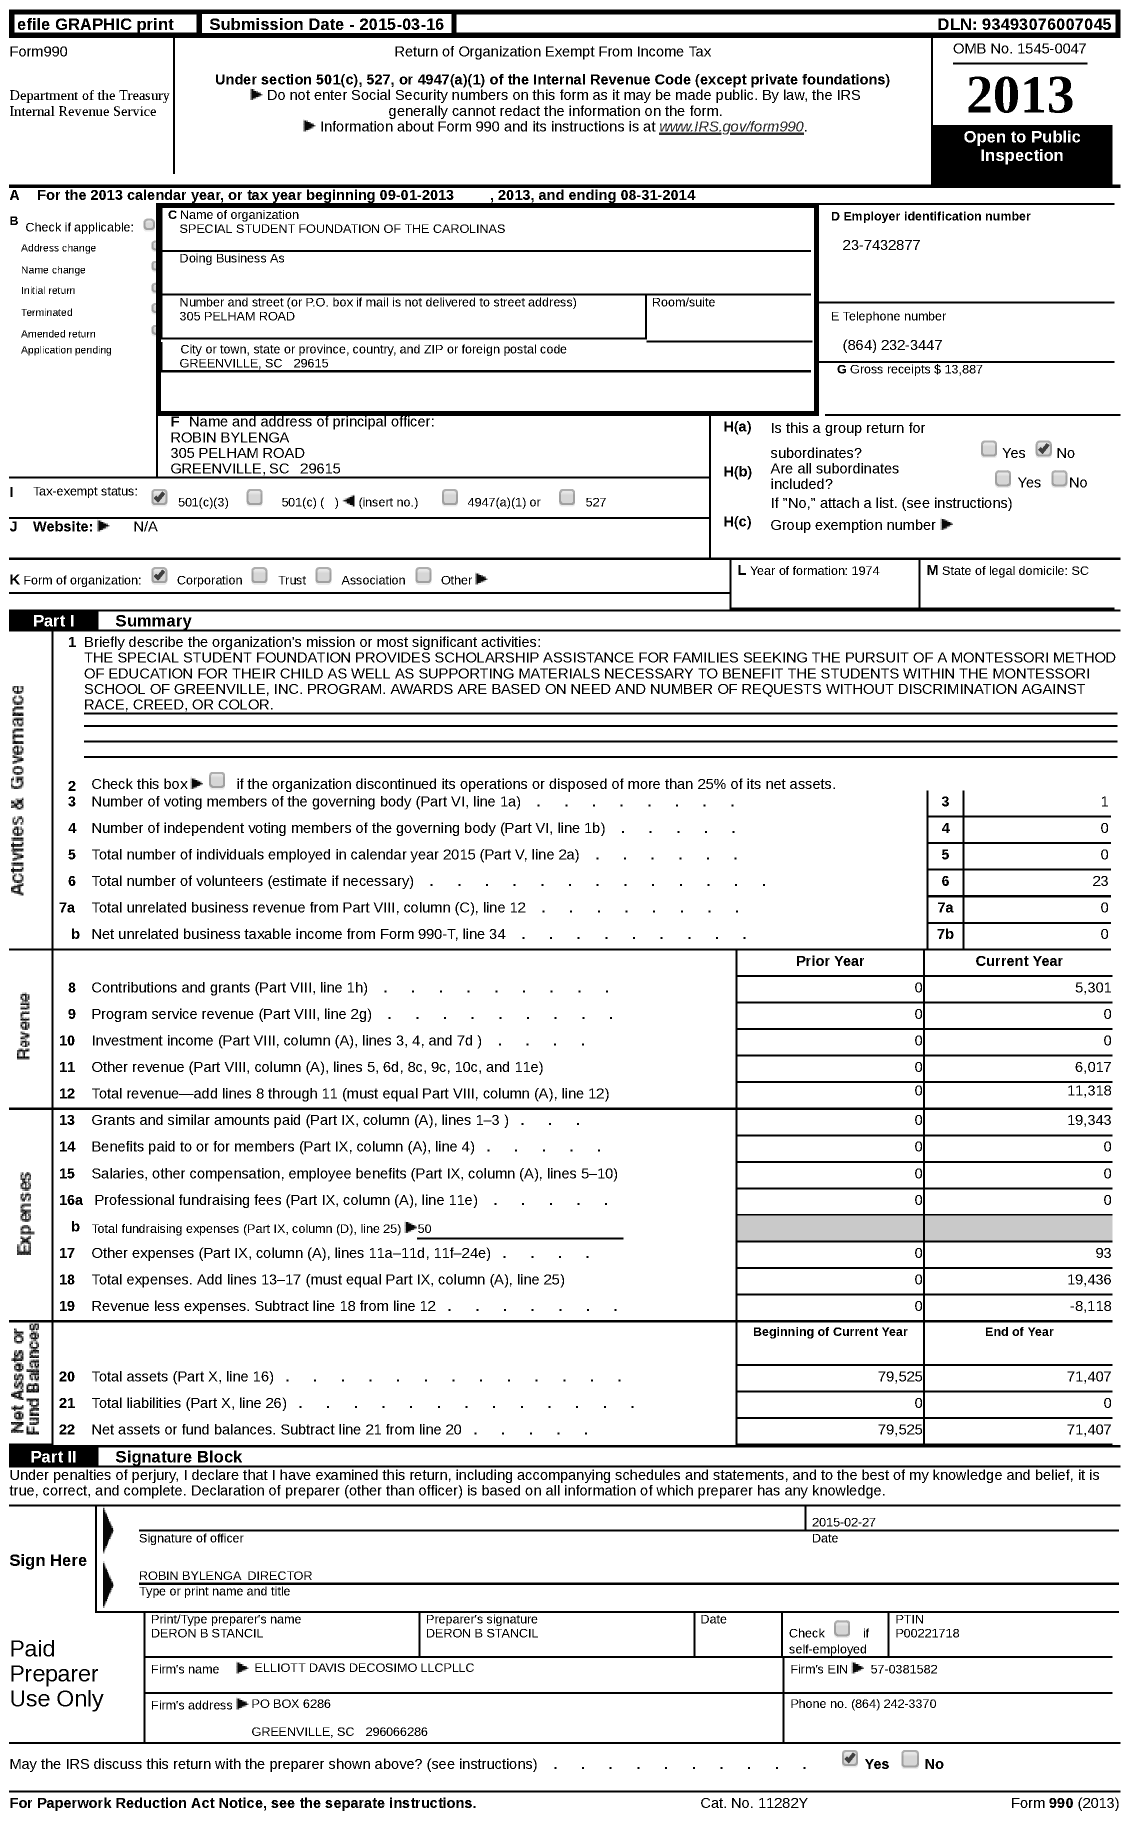 Image of first page of 2013 Form 990 for Special Student Foundation of the Carolinas